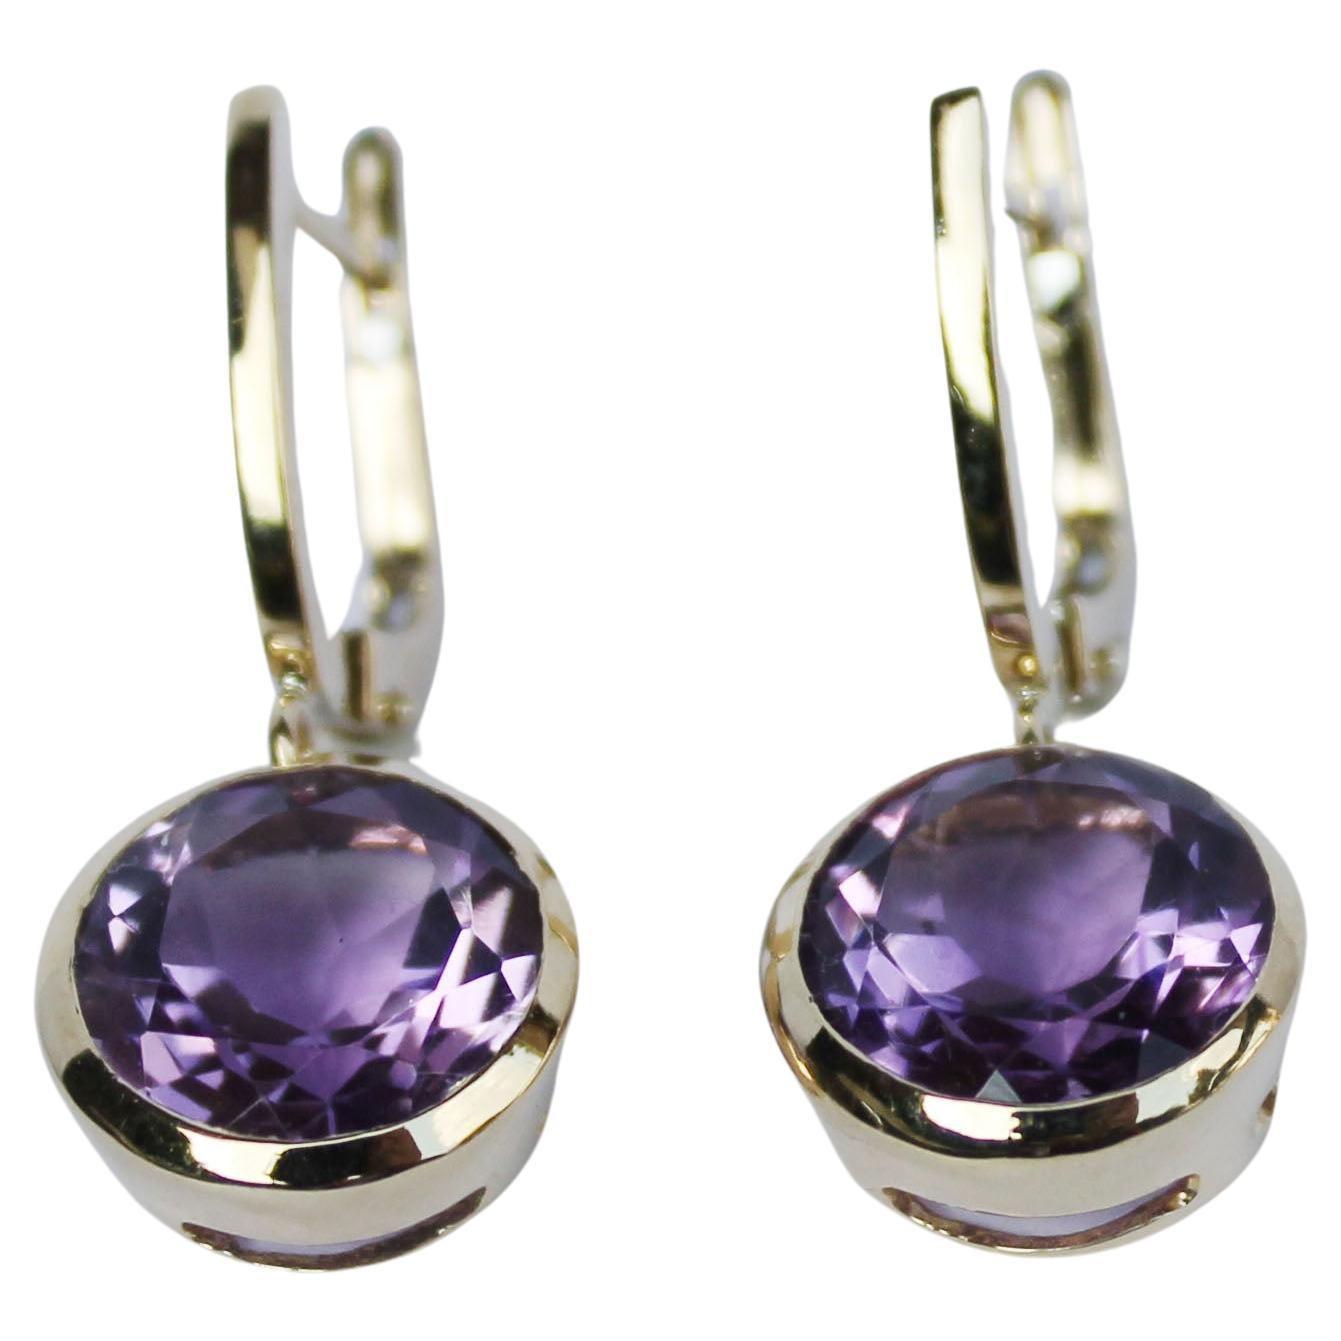 Earrings in yellow gold 18 Karat with Amethyst (round cut, size: 10 mm)

All Stanoppi Jewelry is new and has never been previously owned or worn. Each item will arrive at your door beautifully gift wrapped in Stanoppi boxes, put inside an elegant